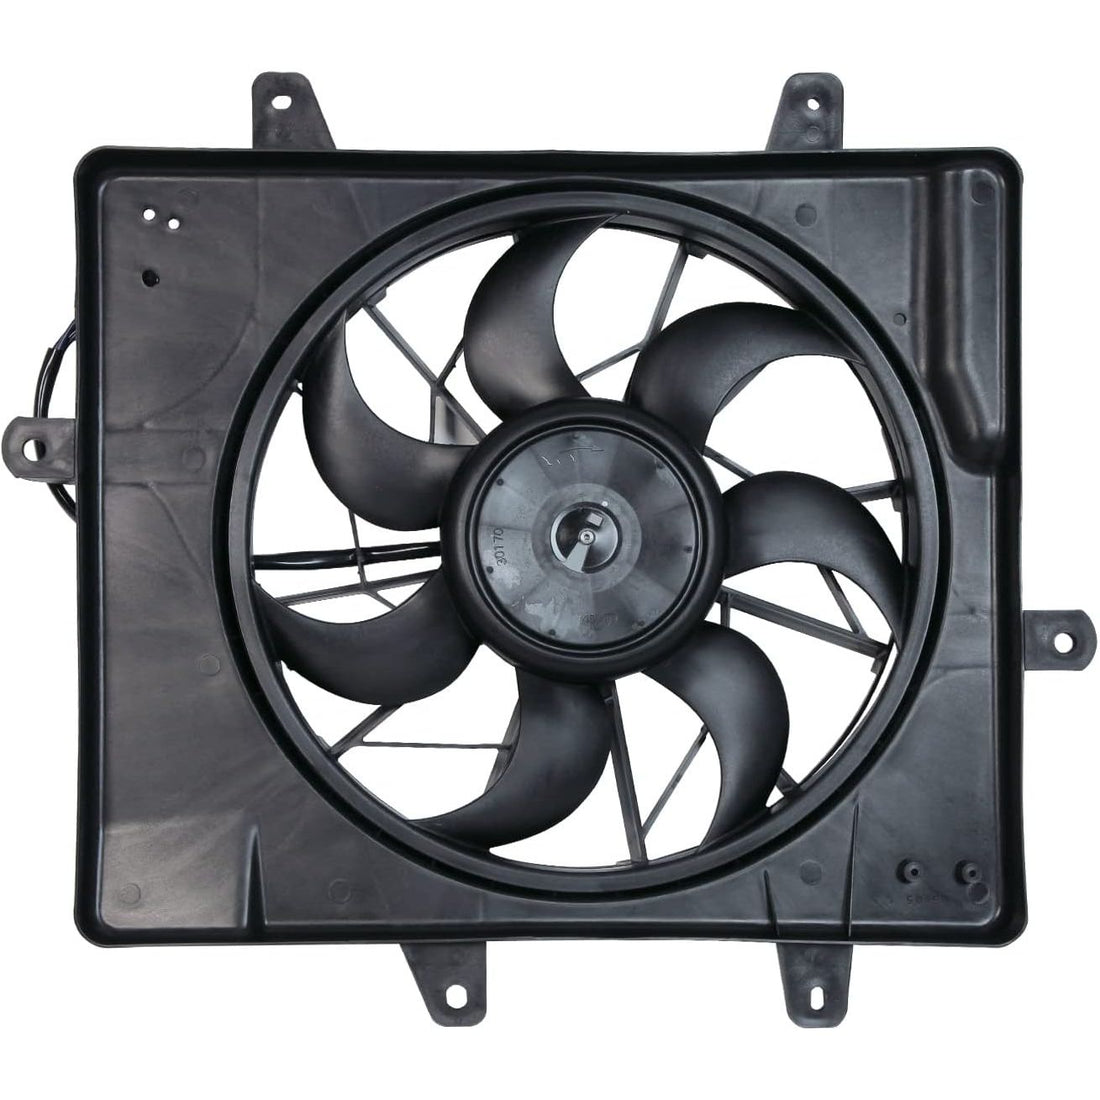 TYC 620440 Replacement Radiator/Condenser Cooling Fan Assembly for Chrysler PT Cruiser , Black